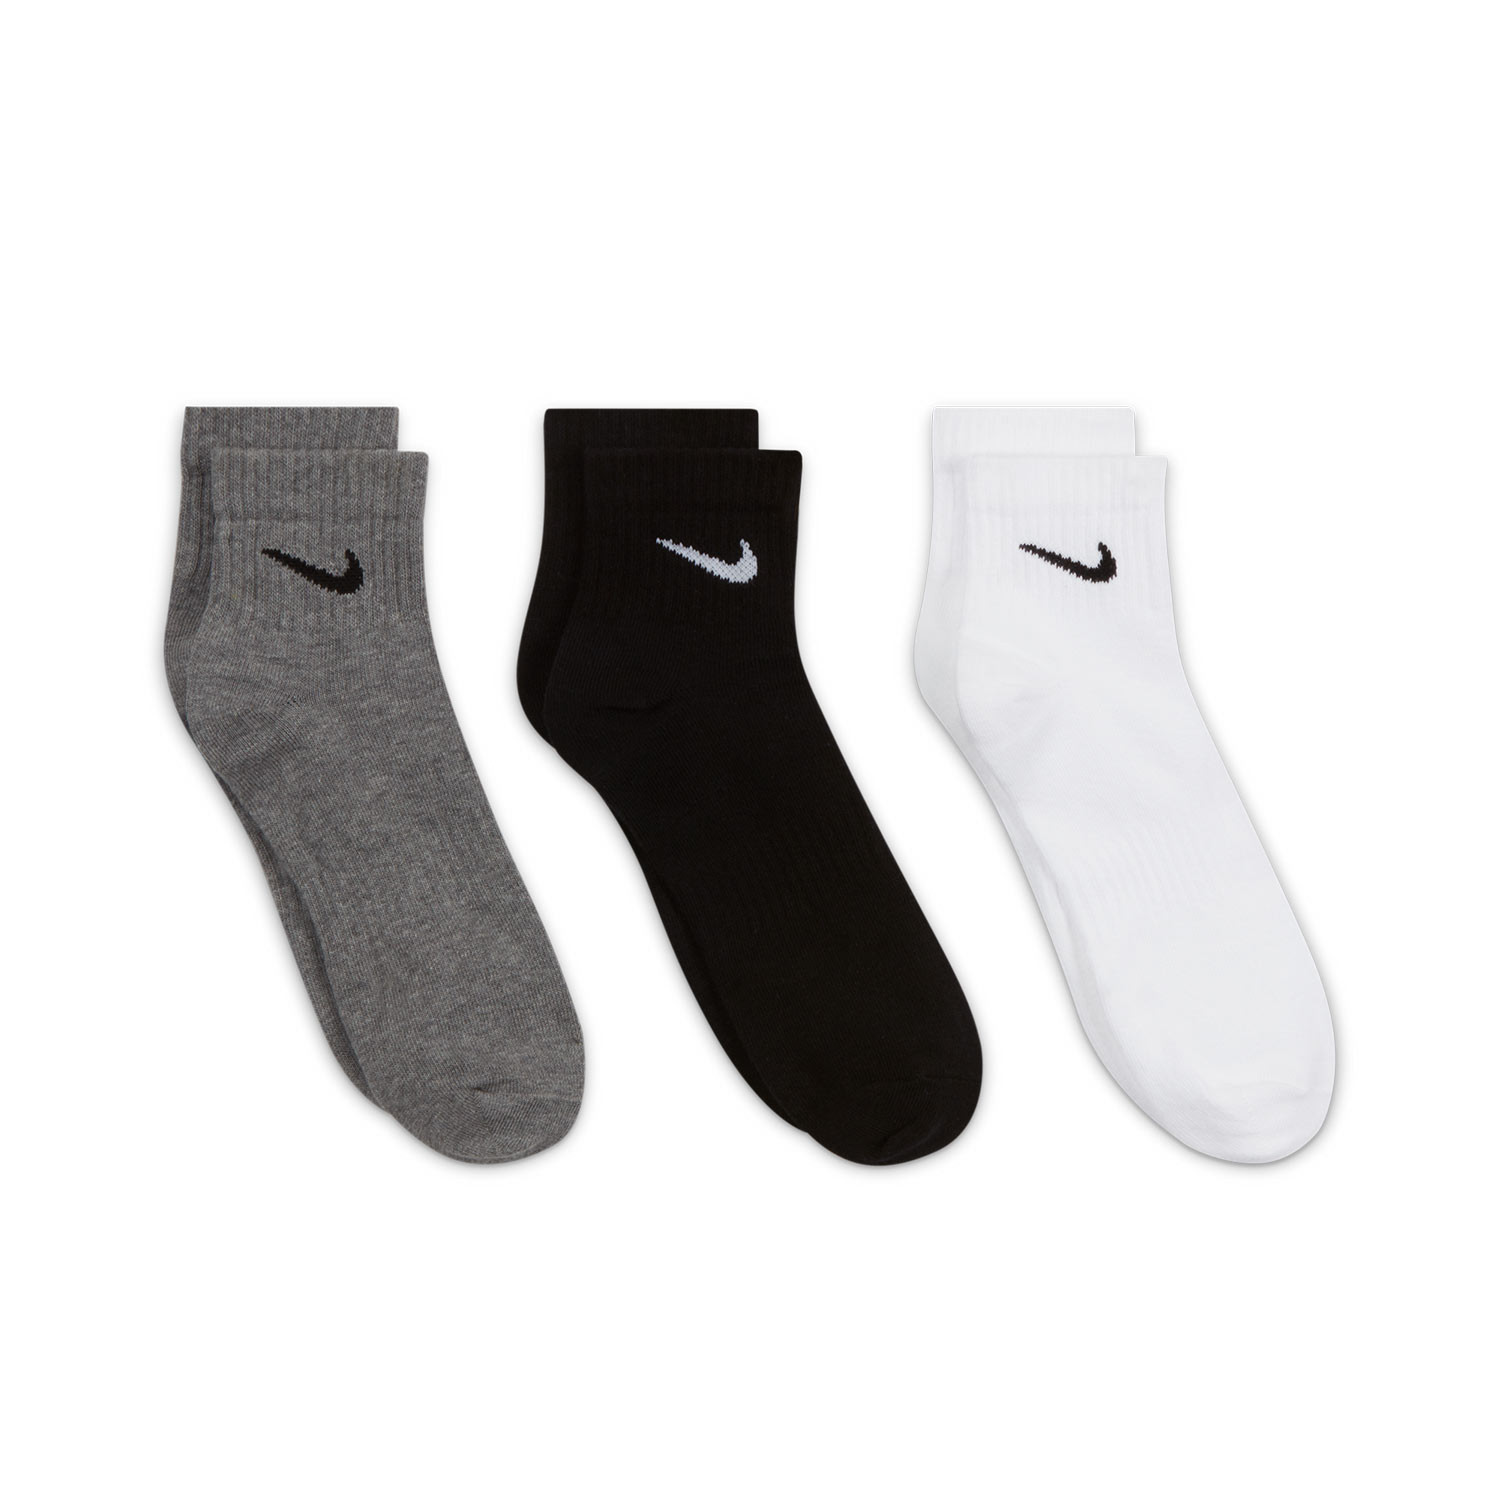 Calcetines Nike Everyday 3 pares finos